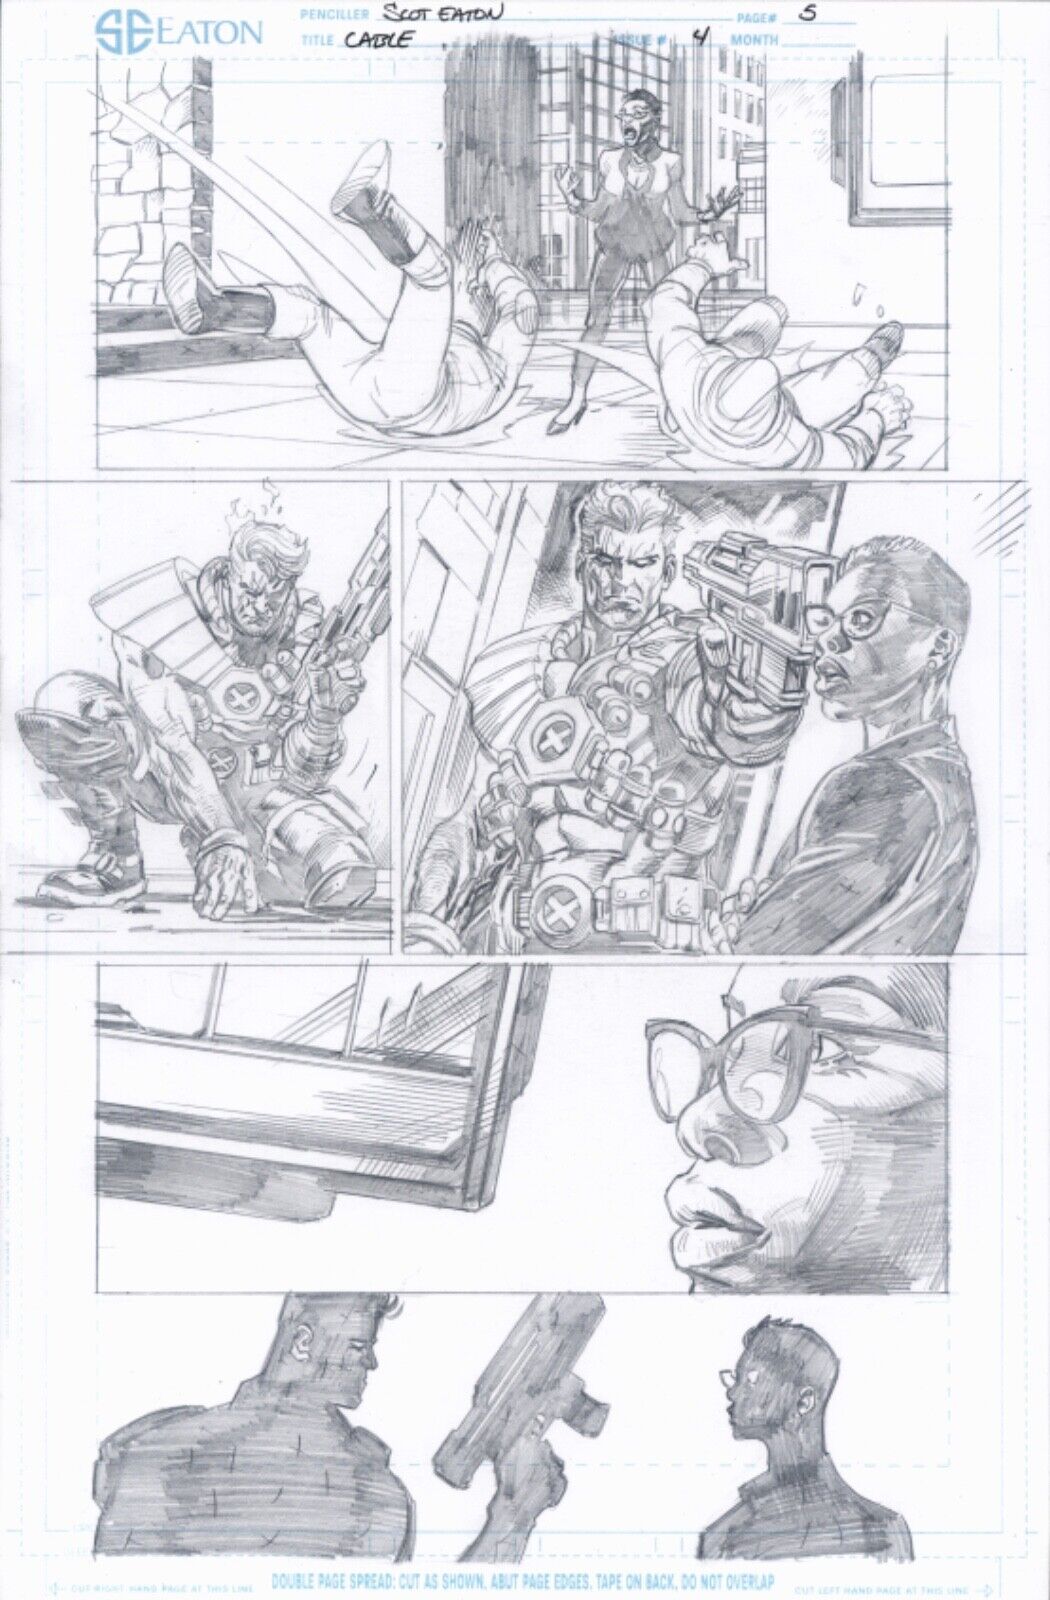 CABLE Original ART.     CABLE #4,  Page 5.      Pencils by SCOT EATON